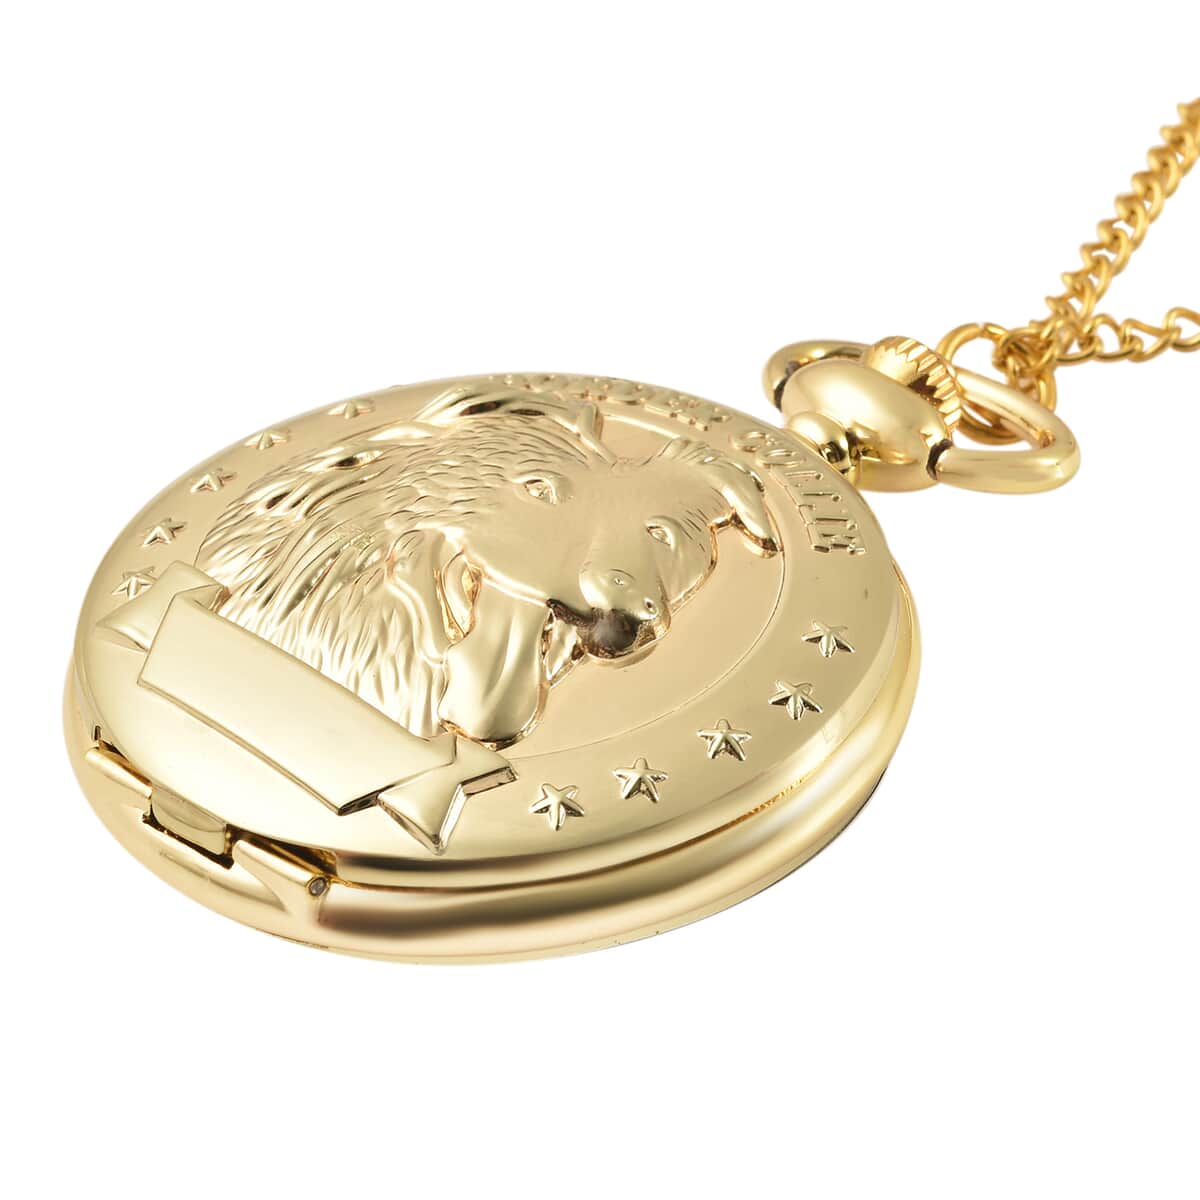 Strada Japanese Movement Border Collie Pocket Watch in Goldtone with Chain (31 Inches) image number 2